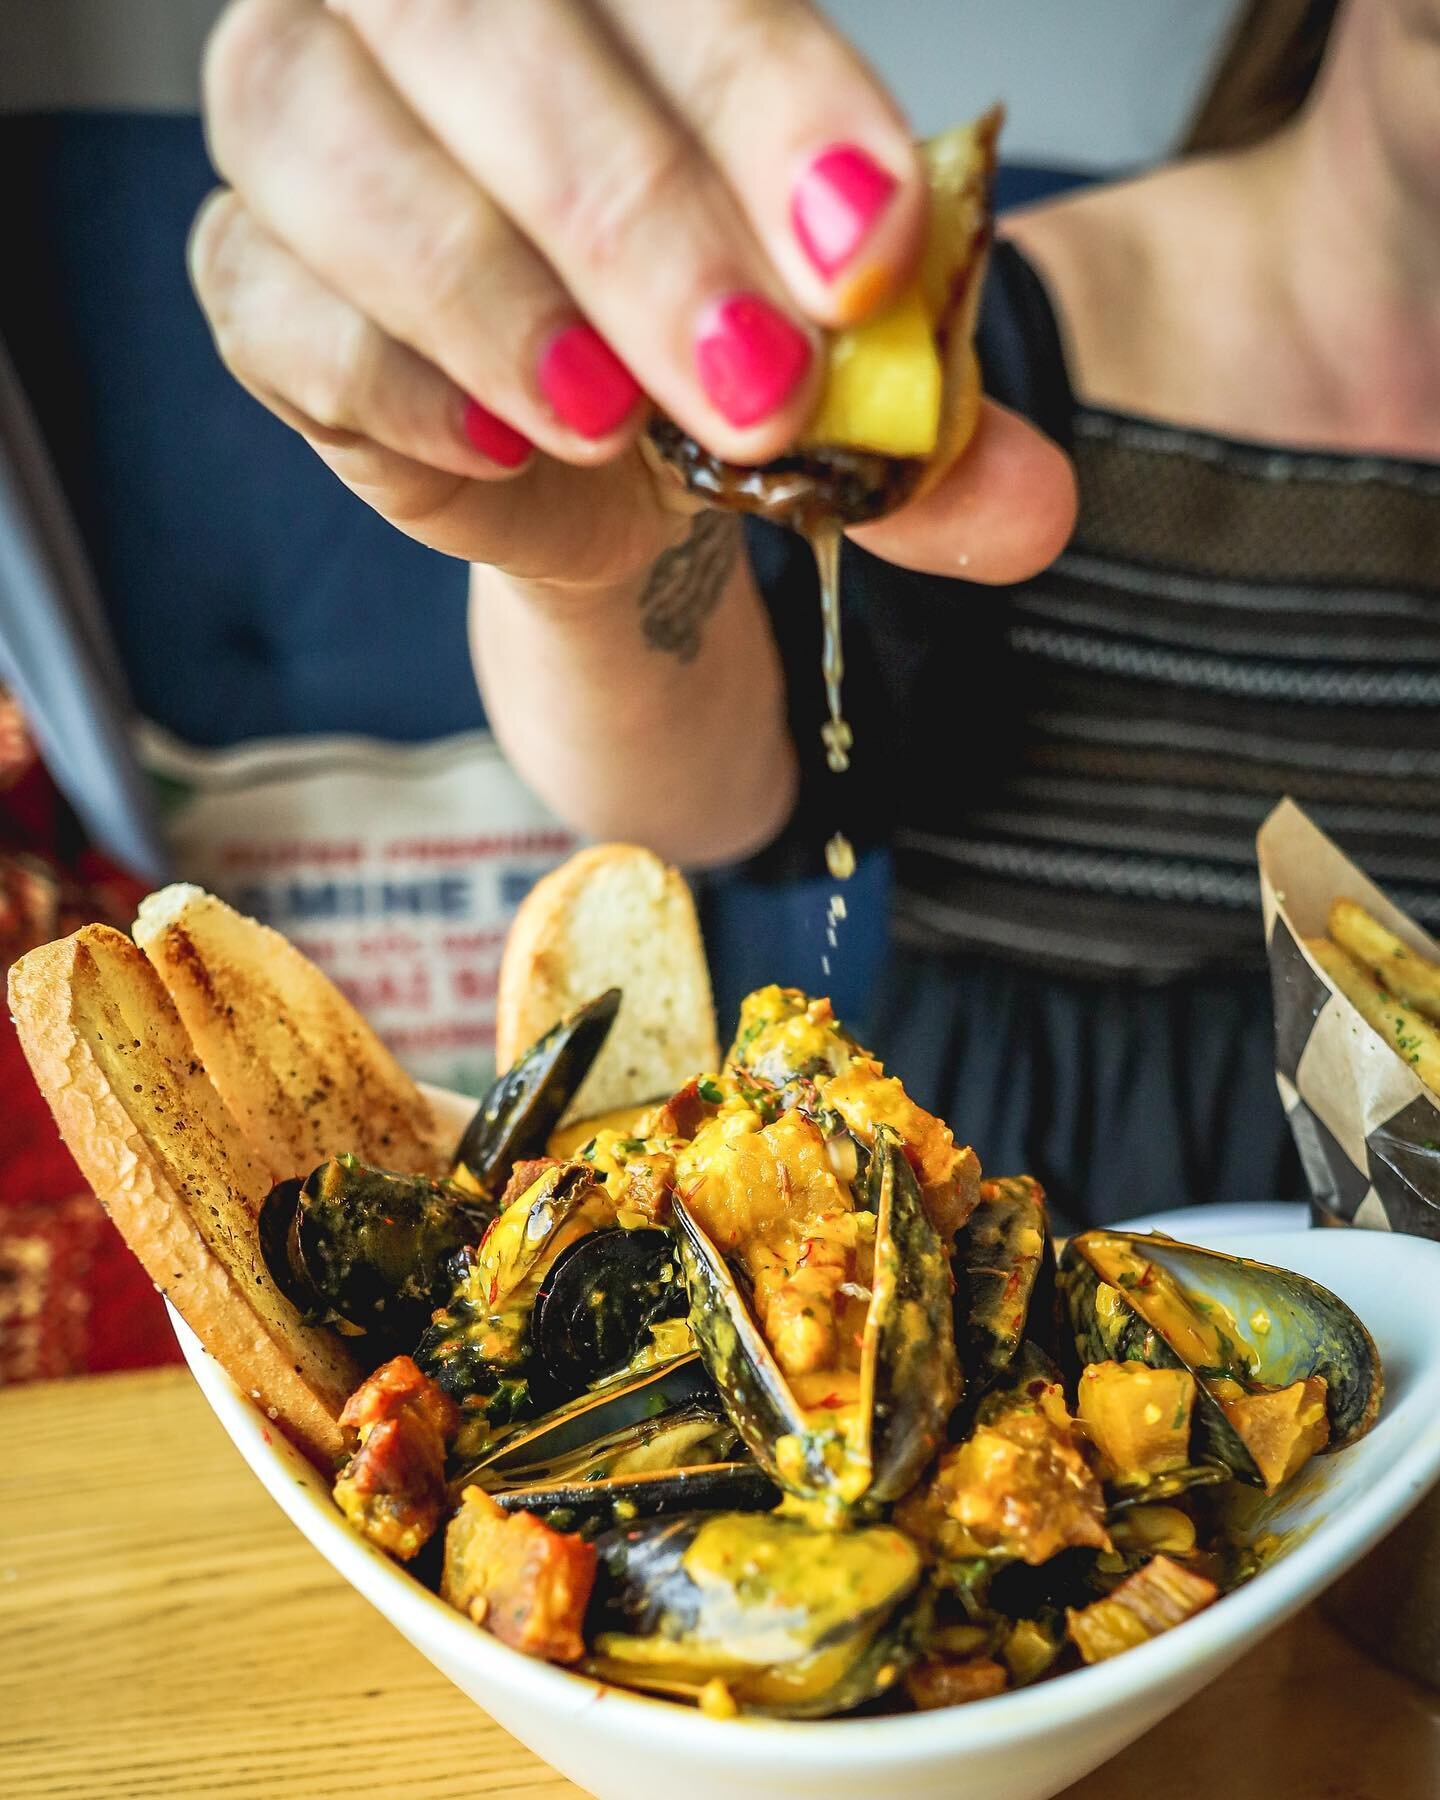 It&rsquo;s gym day. Let them know you&rsquo;re out getting the mussels you&rsquo;ve always wanted 😋🇵🇭

Open at 11am ❤️

📸 @benyantovisuals